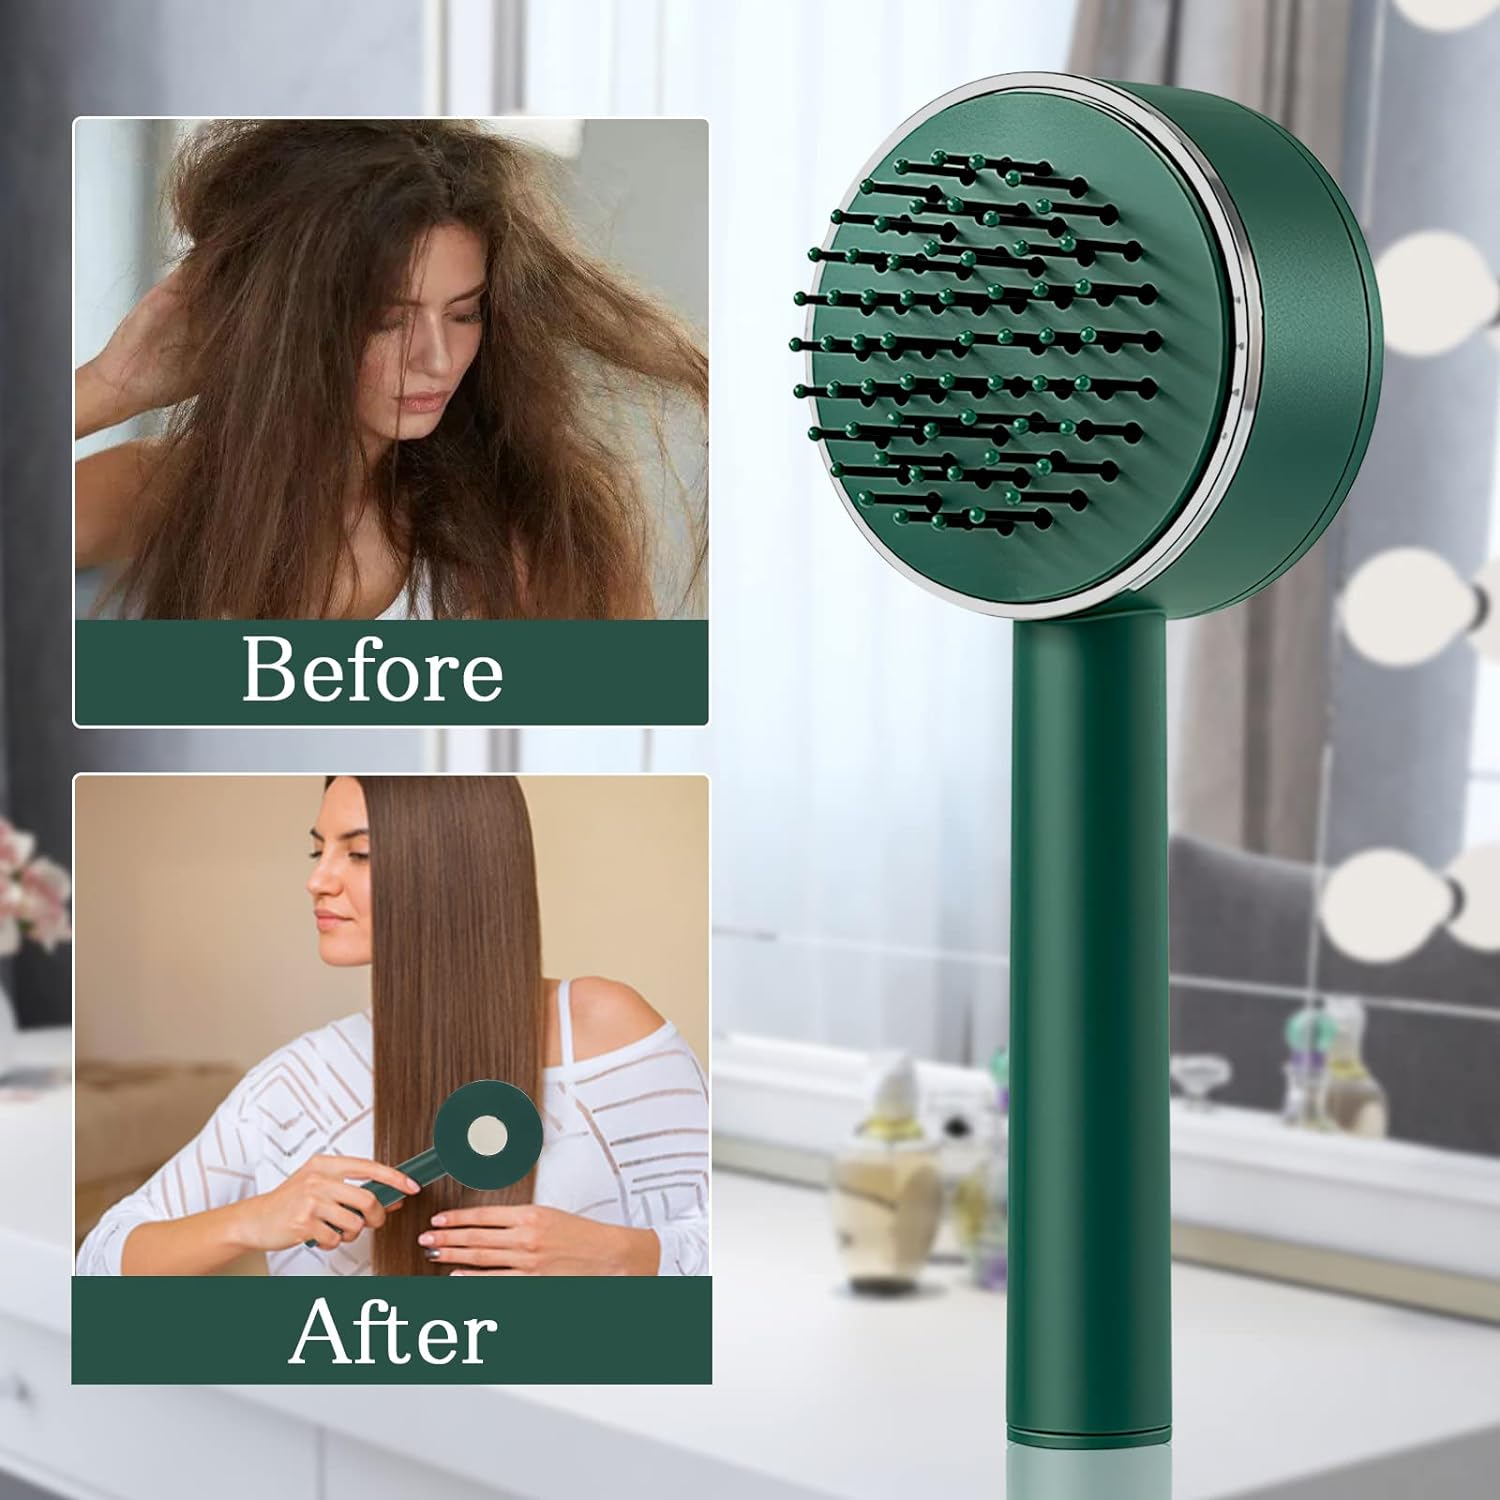 6034ï»¿ Air Cushion Massage Brush, Airbag Massage Comb with Long Handle, Self-Cleaning Hair Brush, Detangling Anti-Static for All Hair